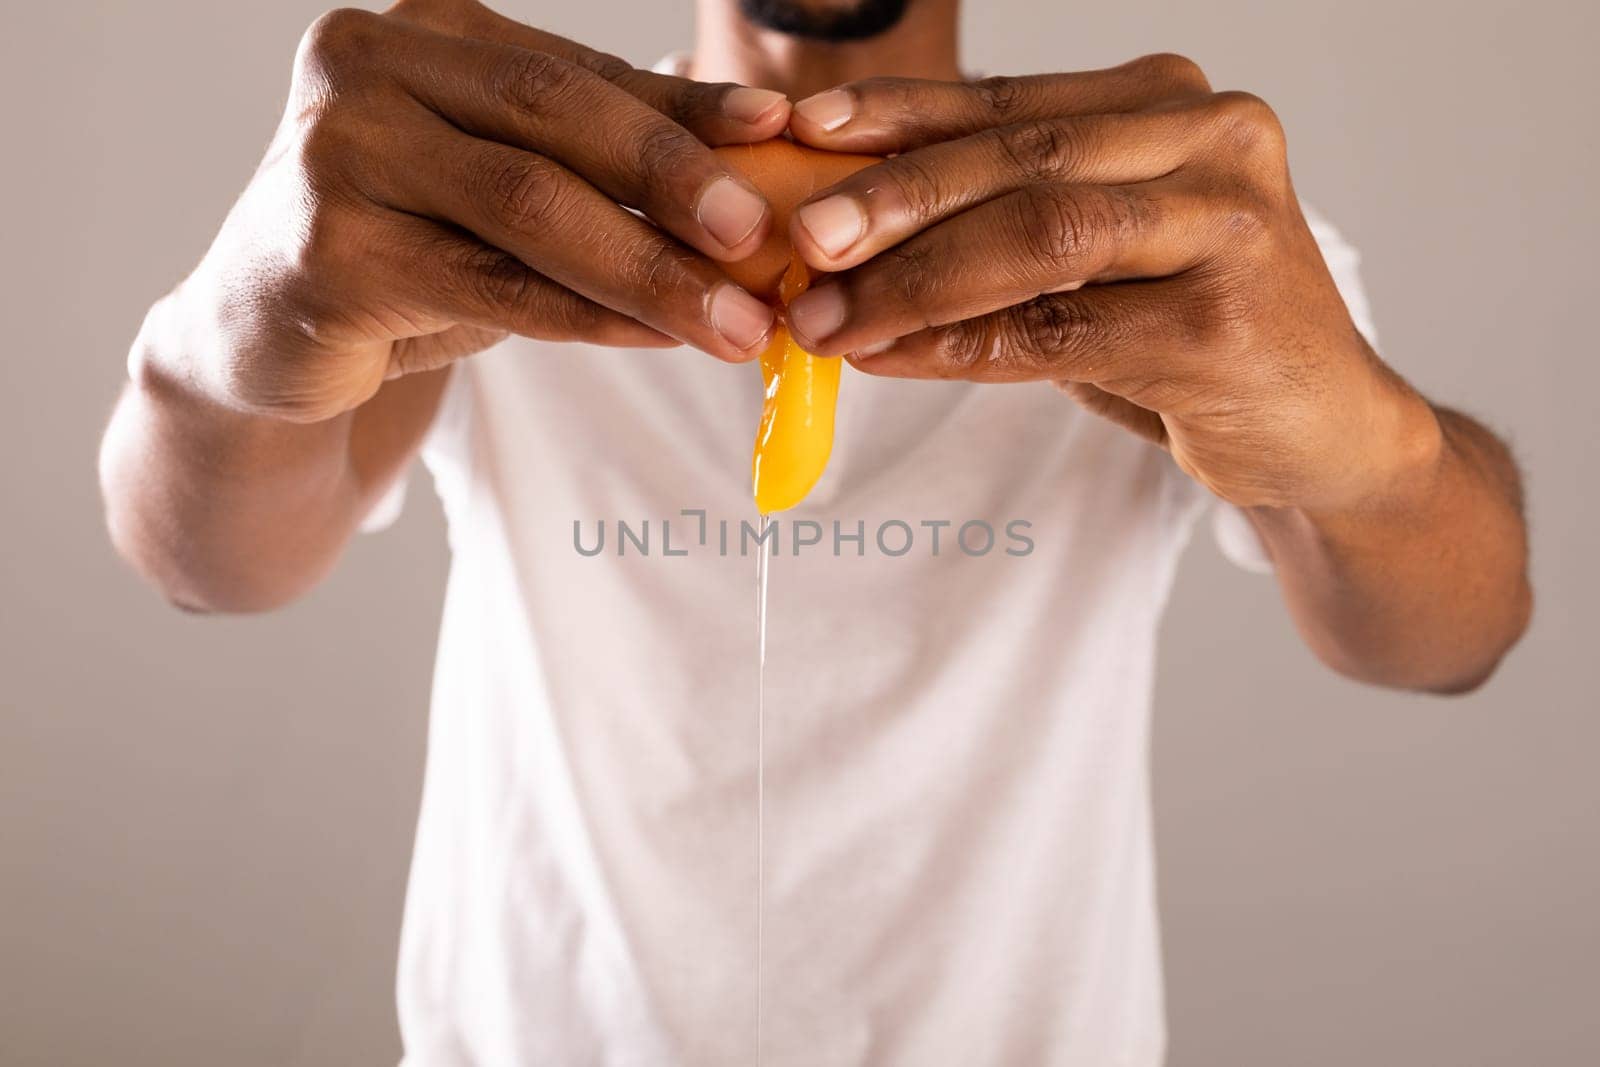 Midsection of man breaking egg shell against gray background by Wavebreakmedia